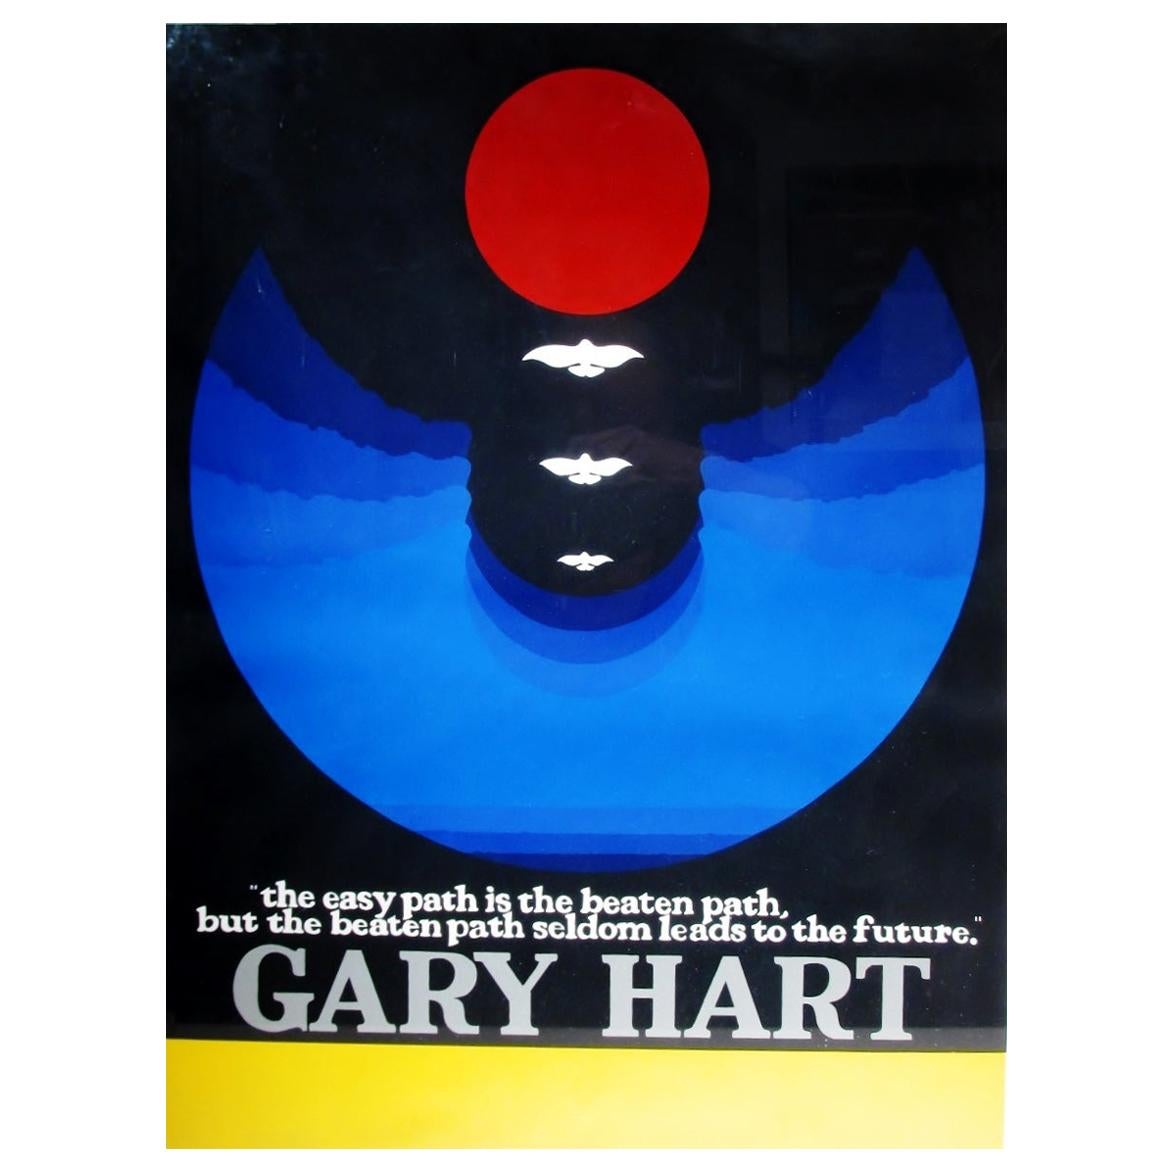 Original Thomas W Benton Serigraph Gary Hart Campaign Poster Signed and Letter